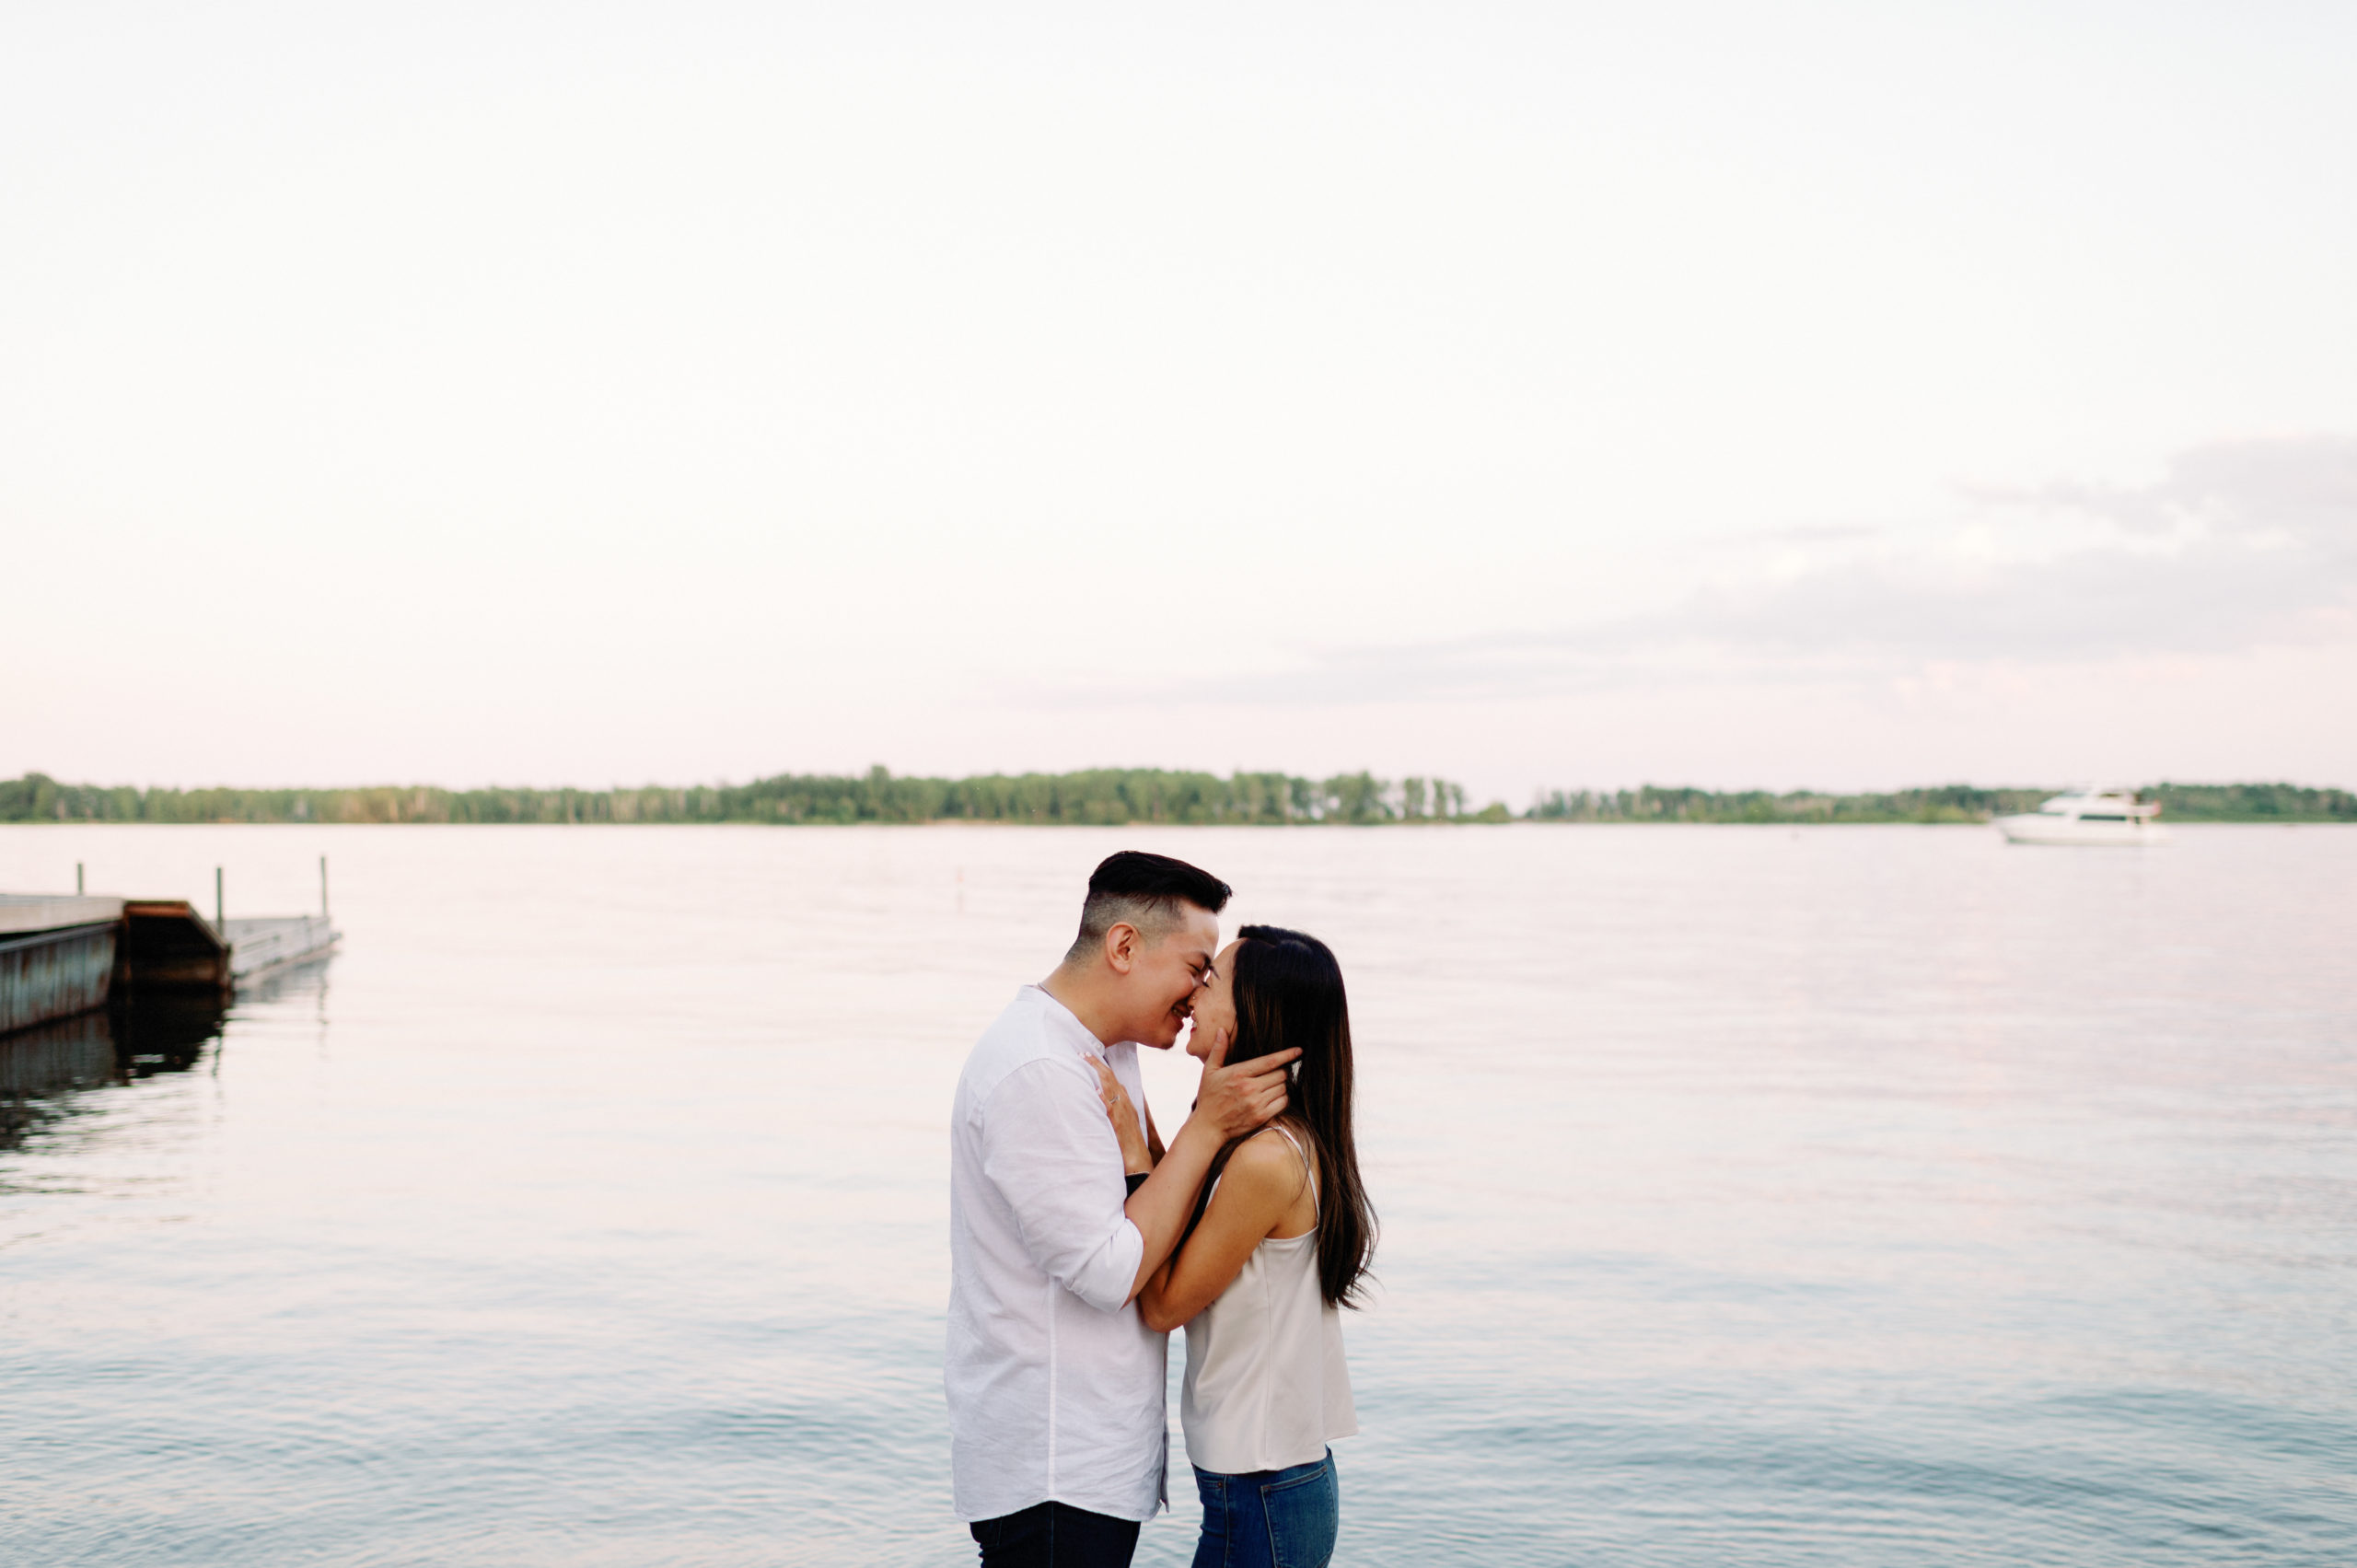 Michelle and Martin Engagement Session Cherry Beach Toronto Summer Sunset Romantic Beach Embrace